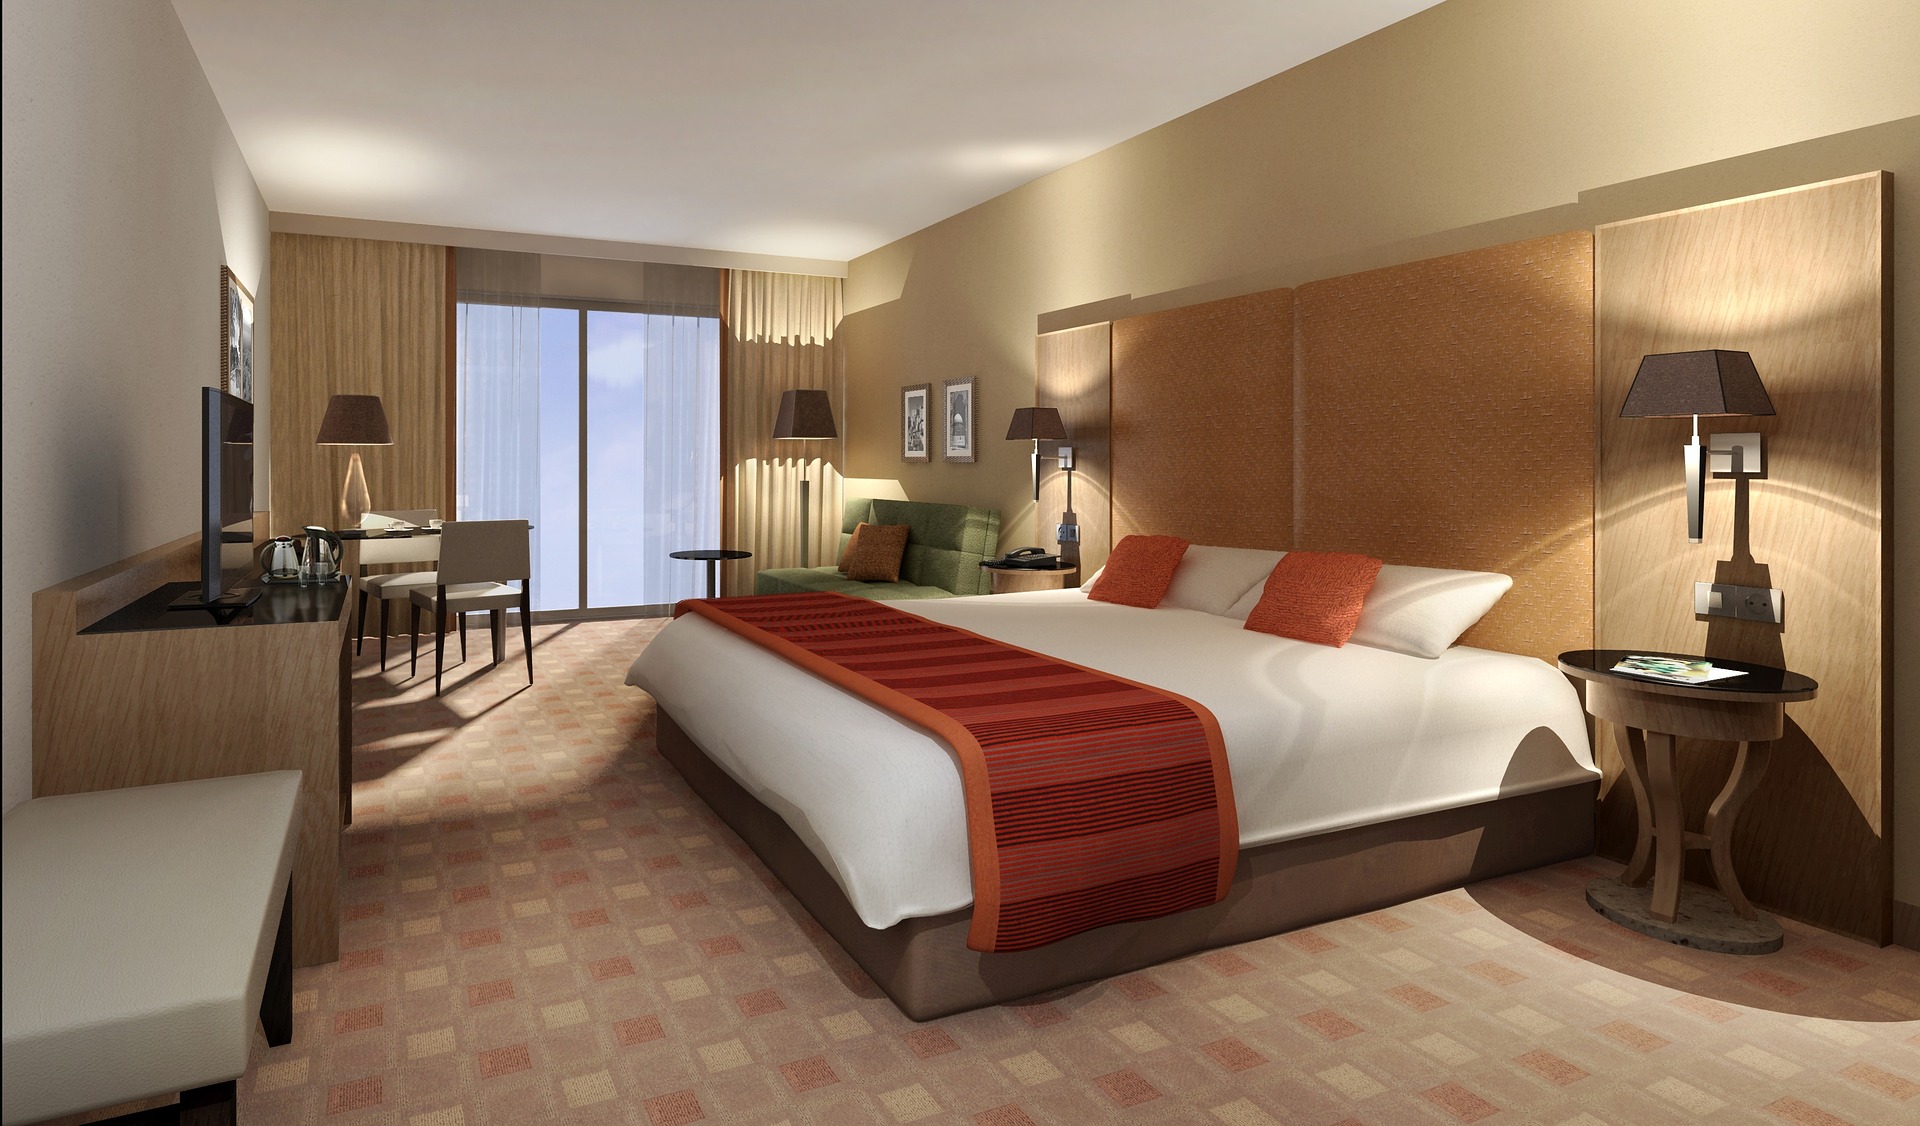 Hotel Energy Efficiency: Cutting Costs While Enhancing Guest Comfort